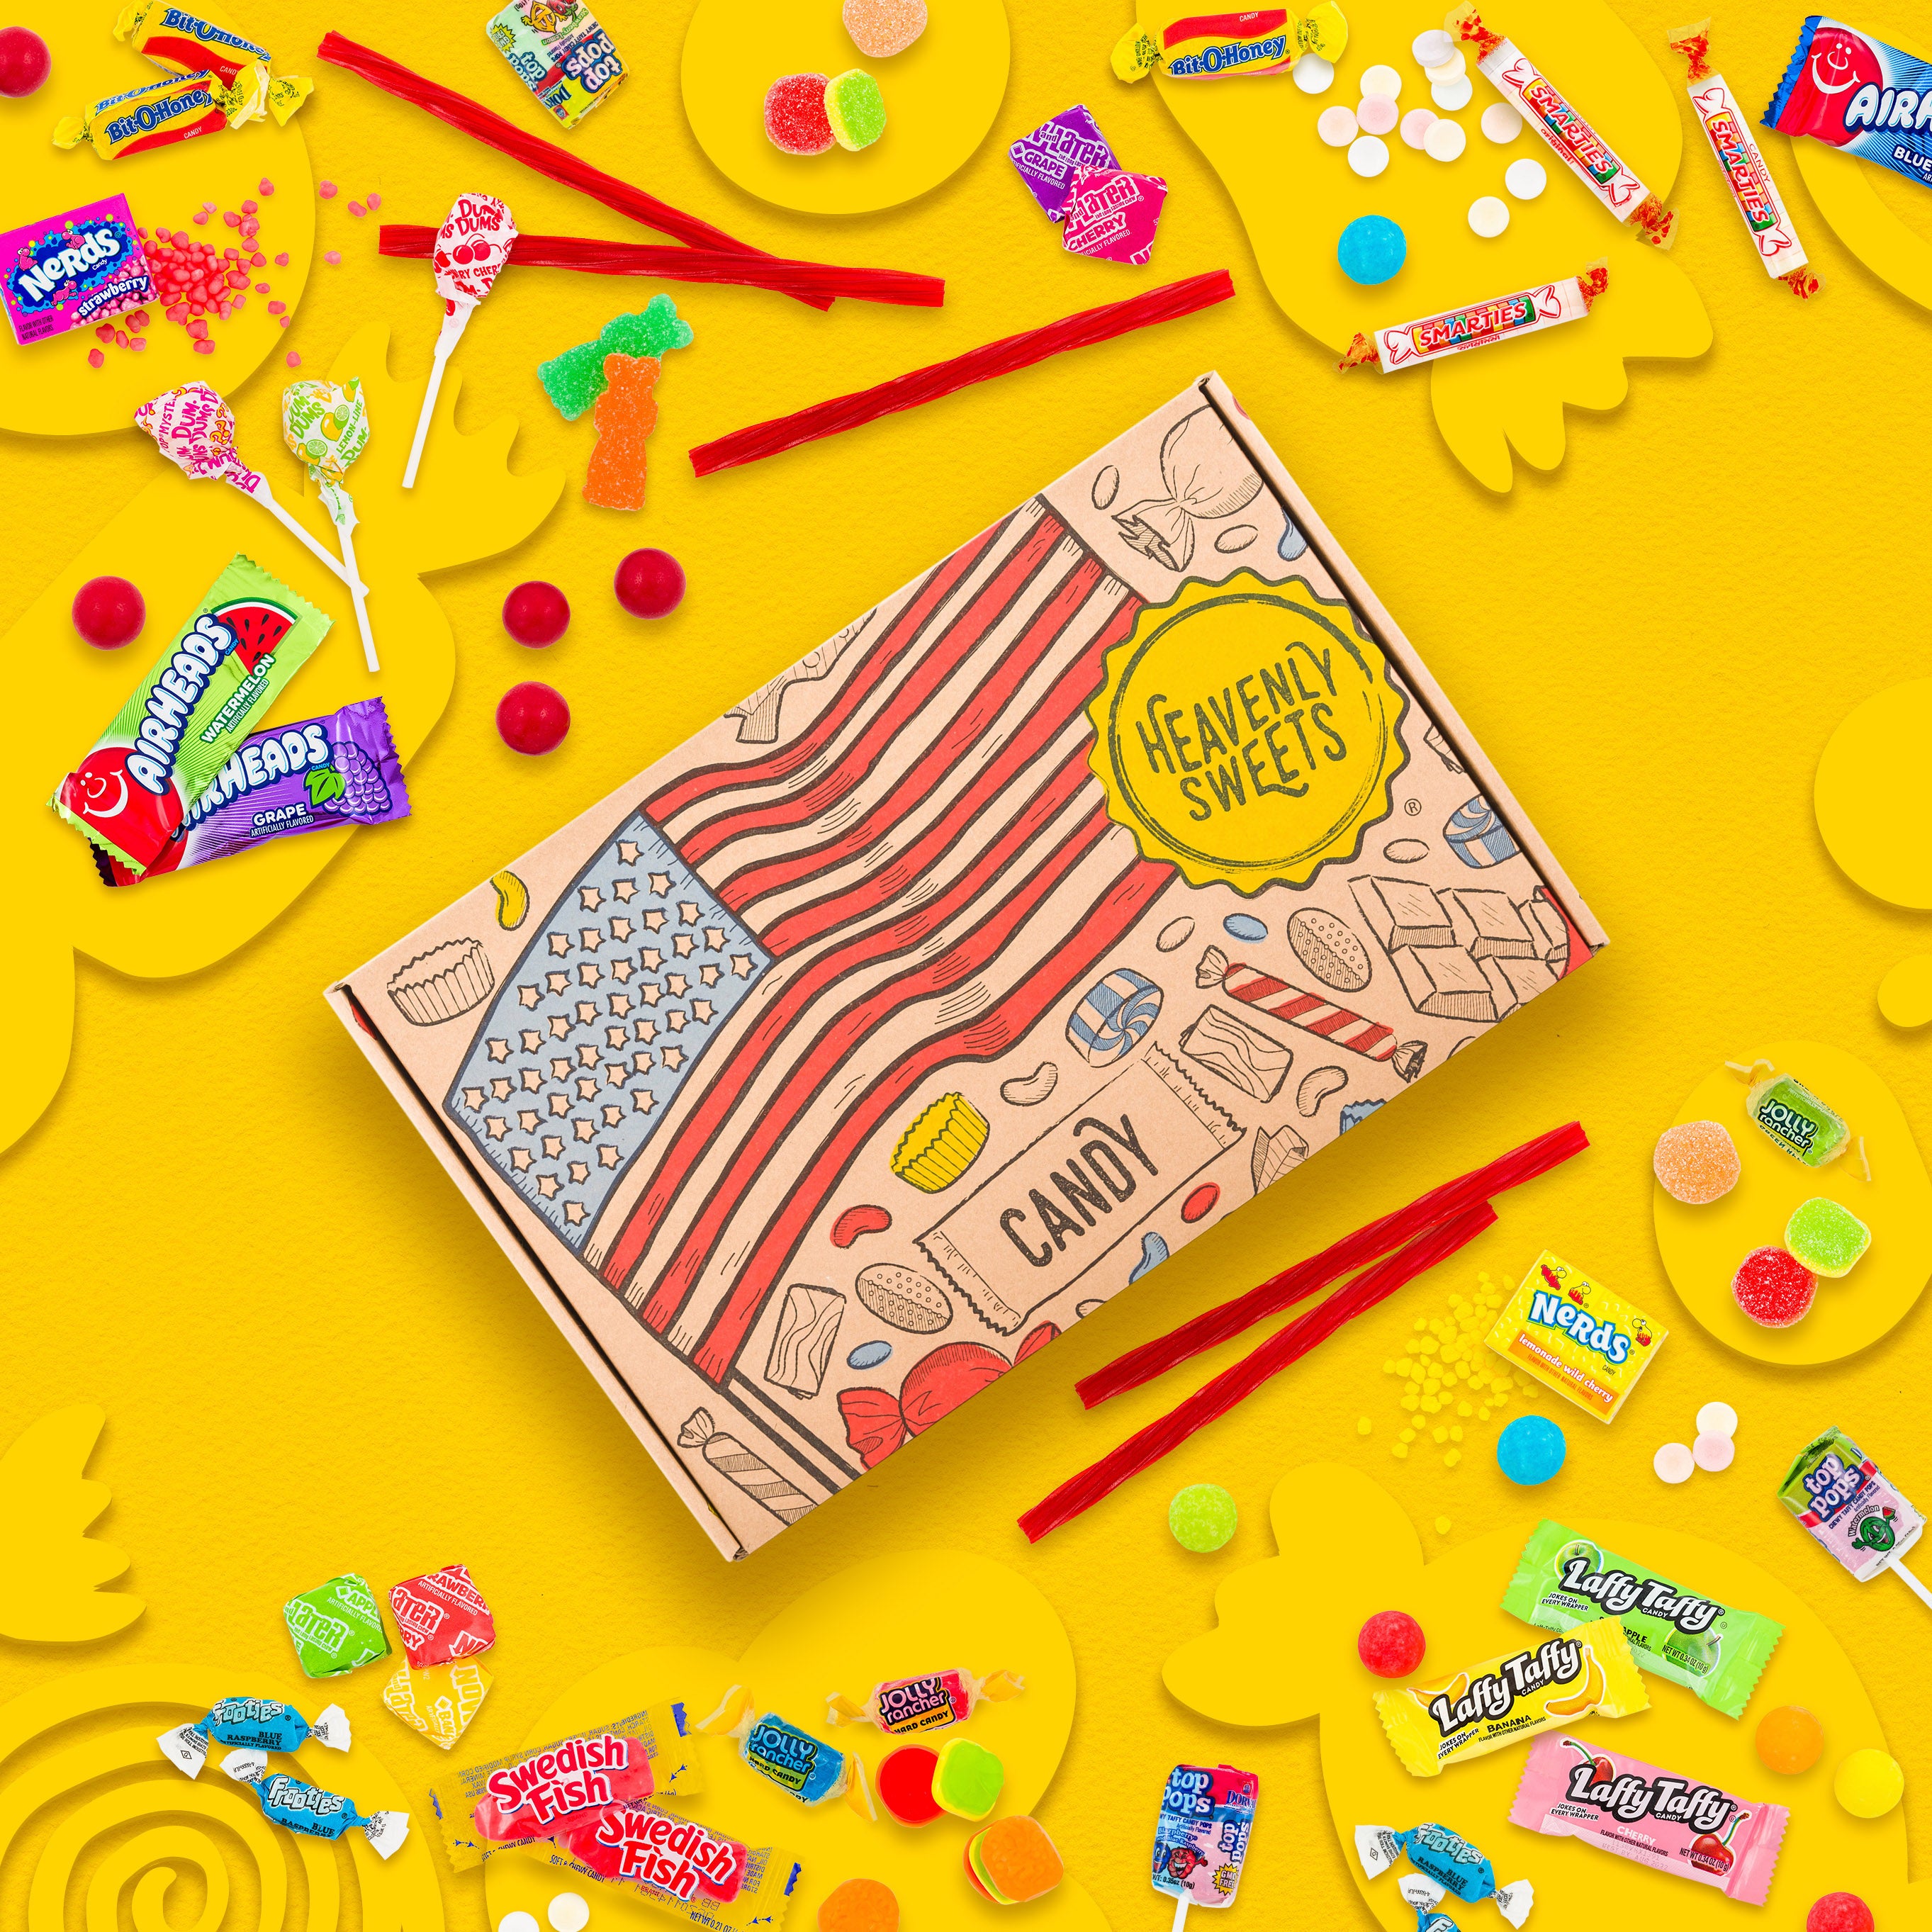 American Candy Sweets Party Gifts Box +100 pieces Hamper! Fathers Day & Birthday | Airheads, Laffy Taffy and more!